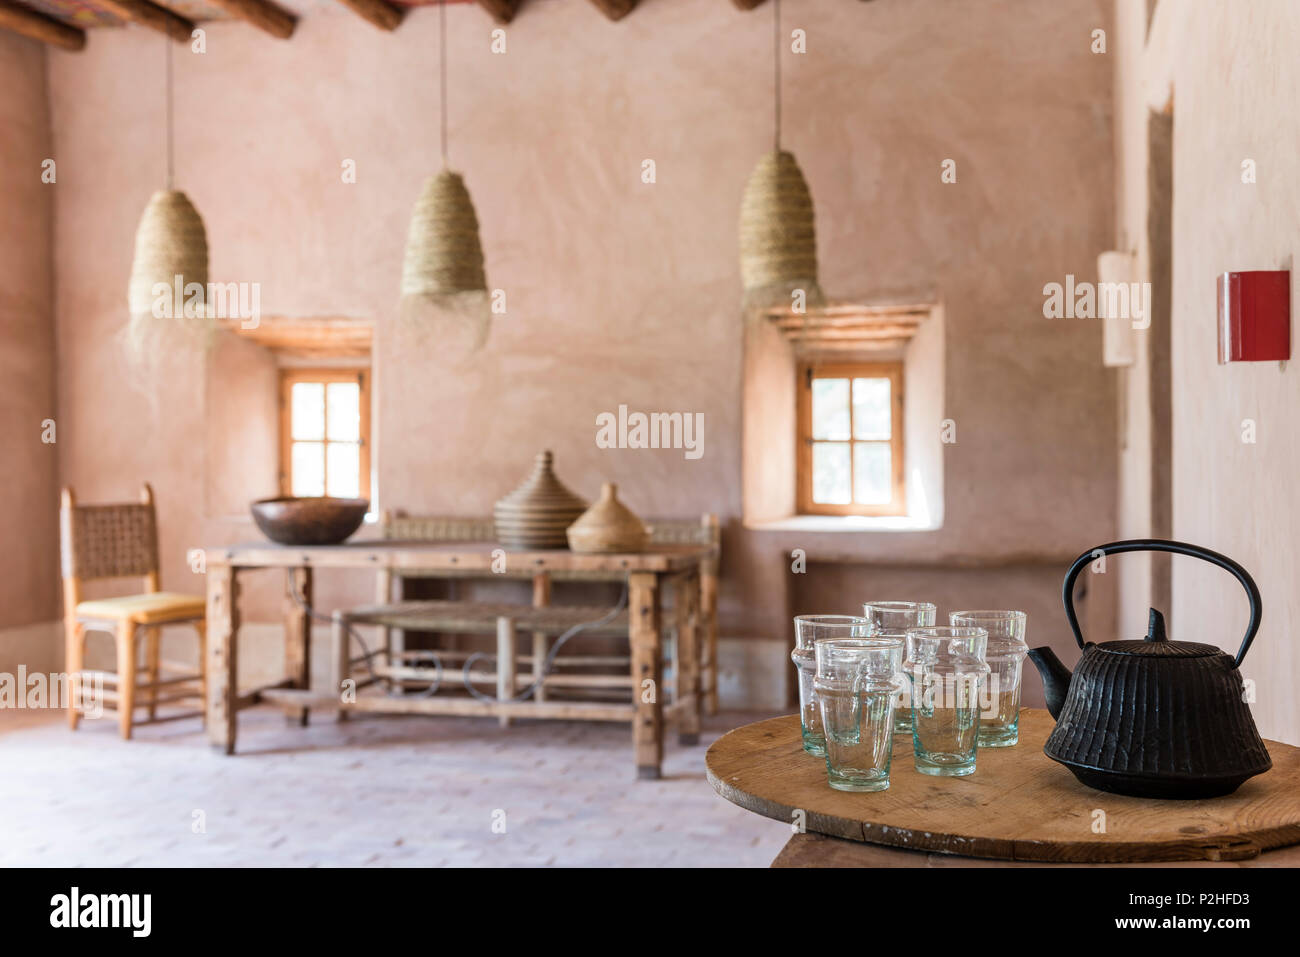 Cast iron tea pot and glasses in foreground of moroccan dining room with rattan oendant lights, earth walls and terracotta floors Stock Photo